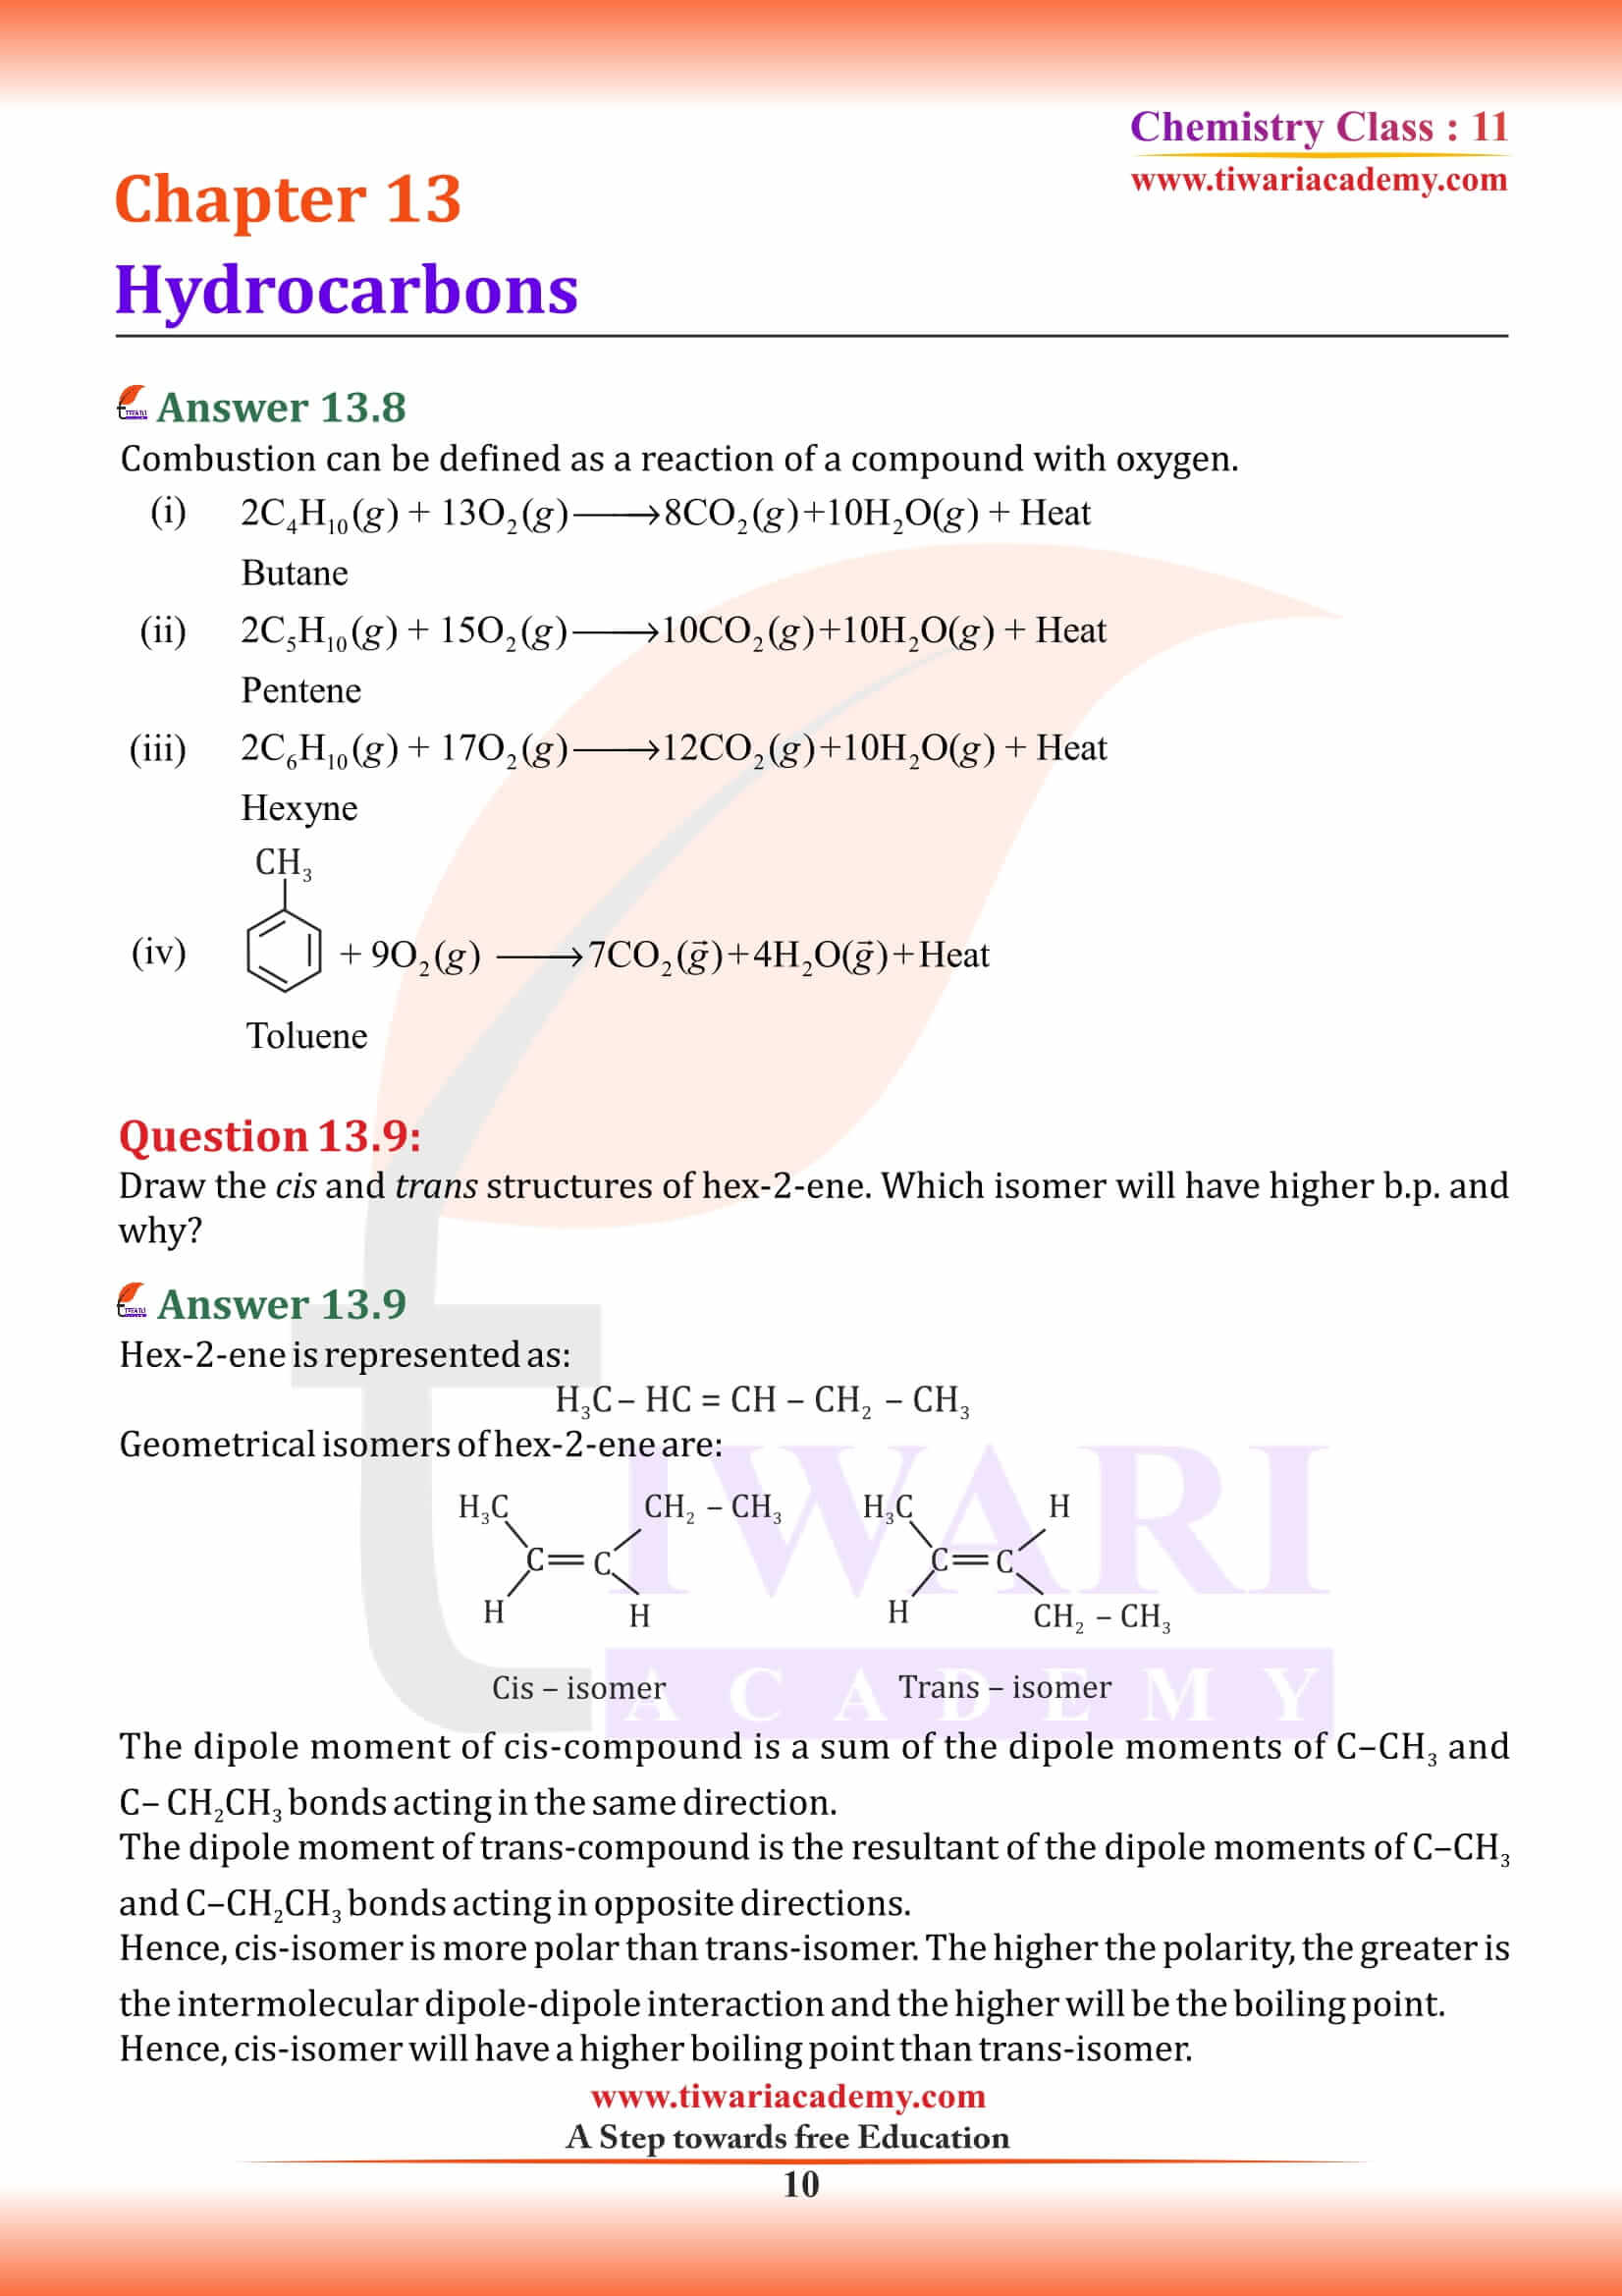 Class 11 Chemistry Chapter 13 English Medium question answers